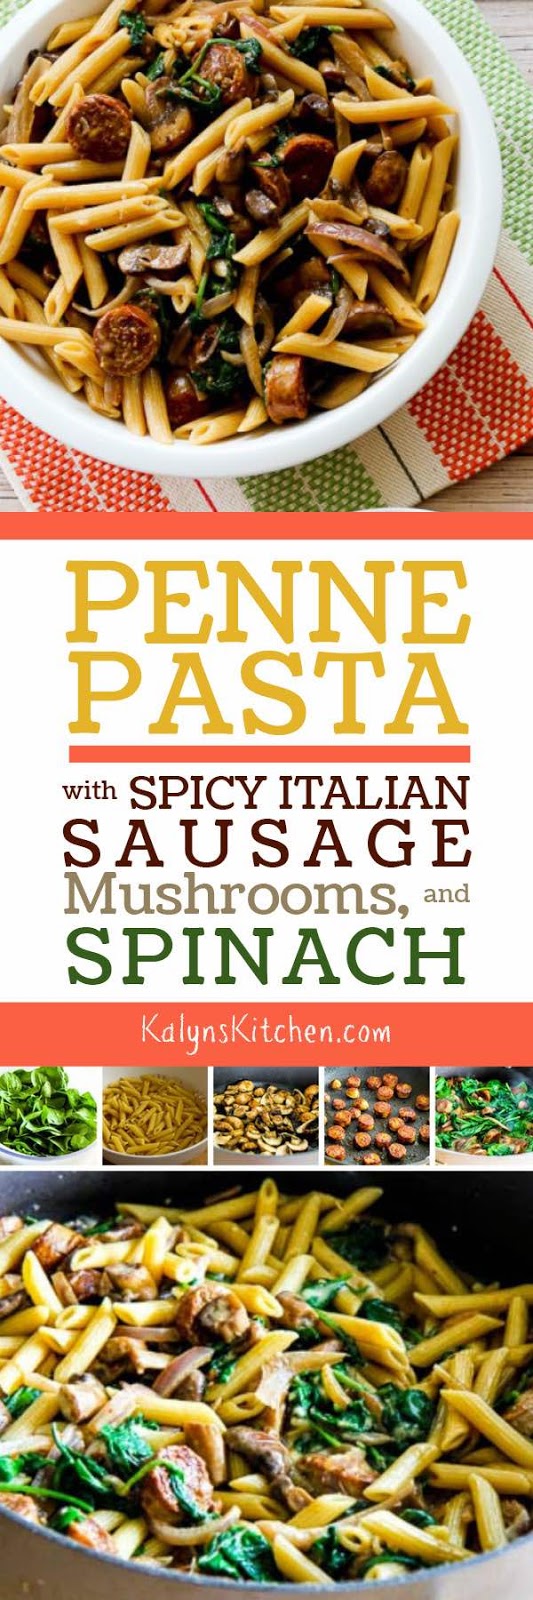 Penne Pasta with Spicy Italian Sausage, Mushrooms, and Spinach - Kalyn ...